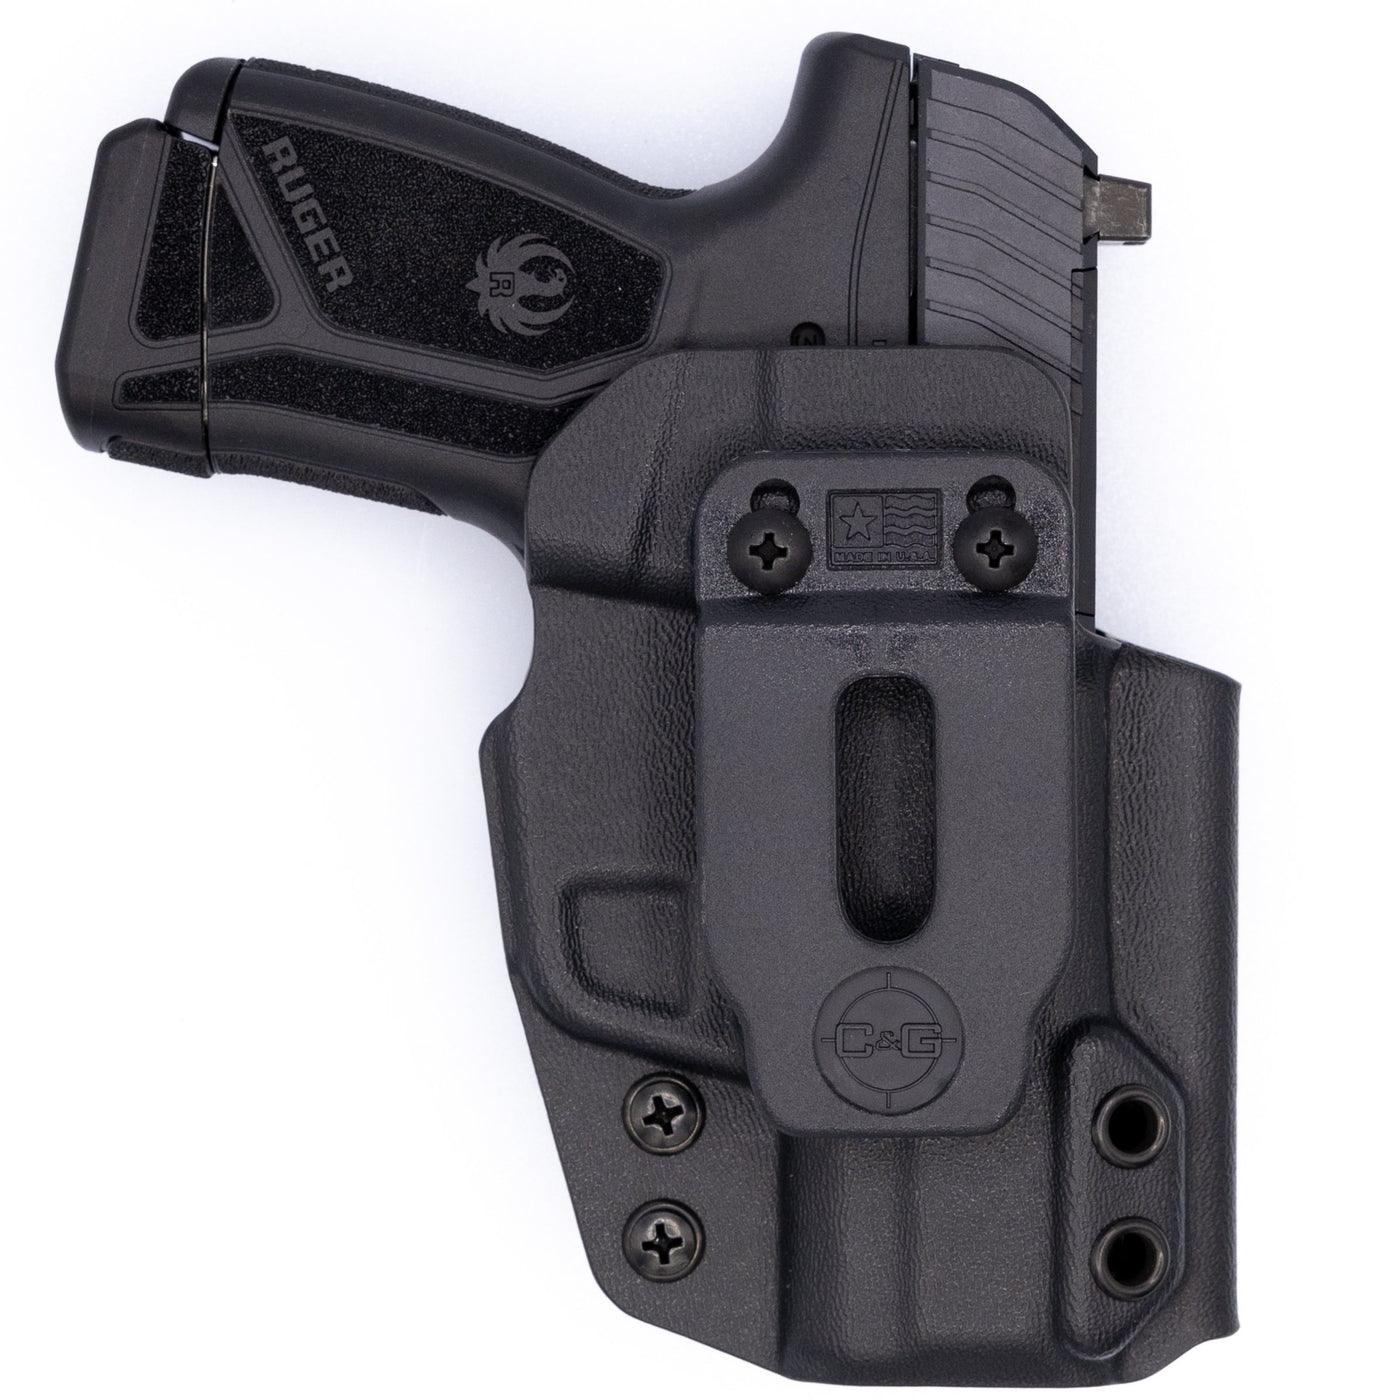 Shown is the custom C&G Holsters IWB inside the waistband Holster for the Ruger MAX-9.